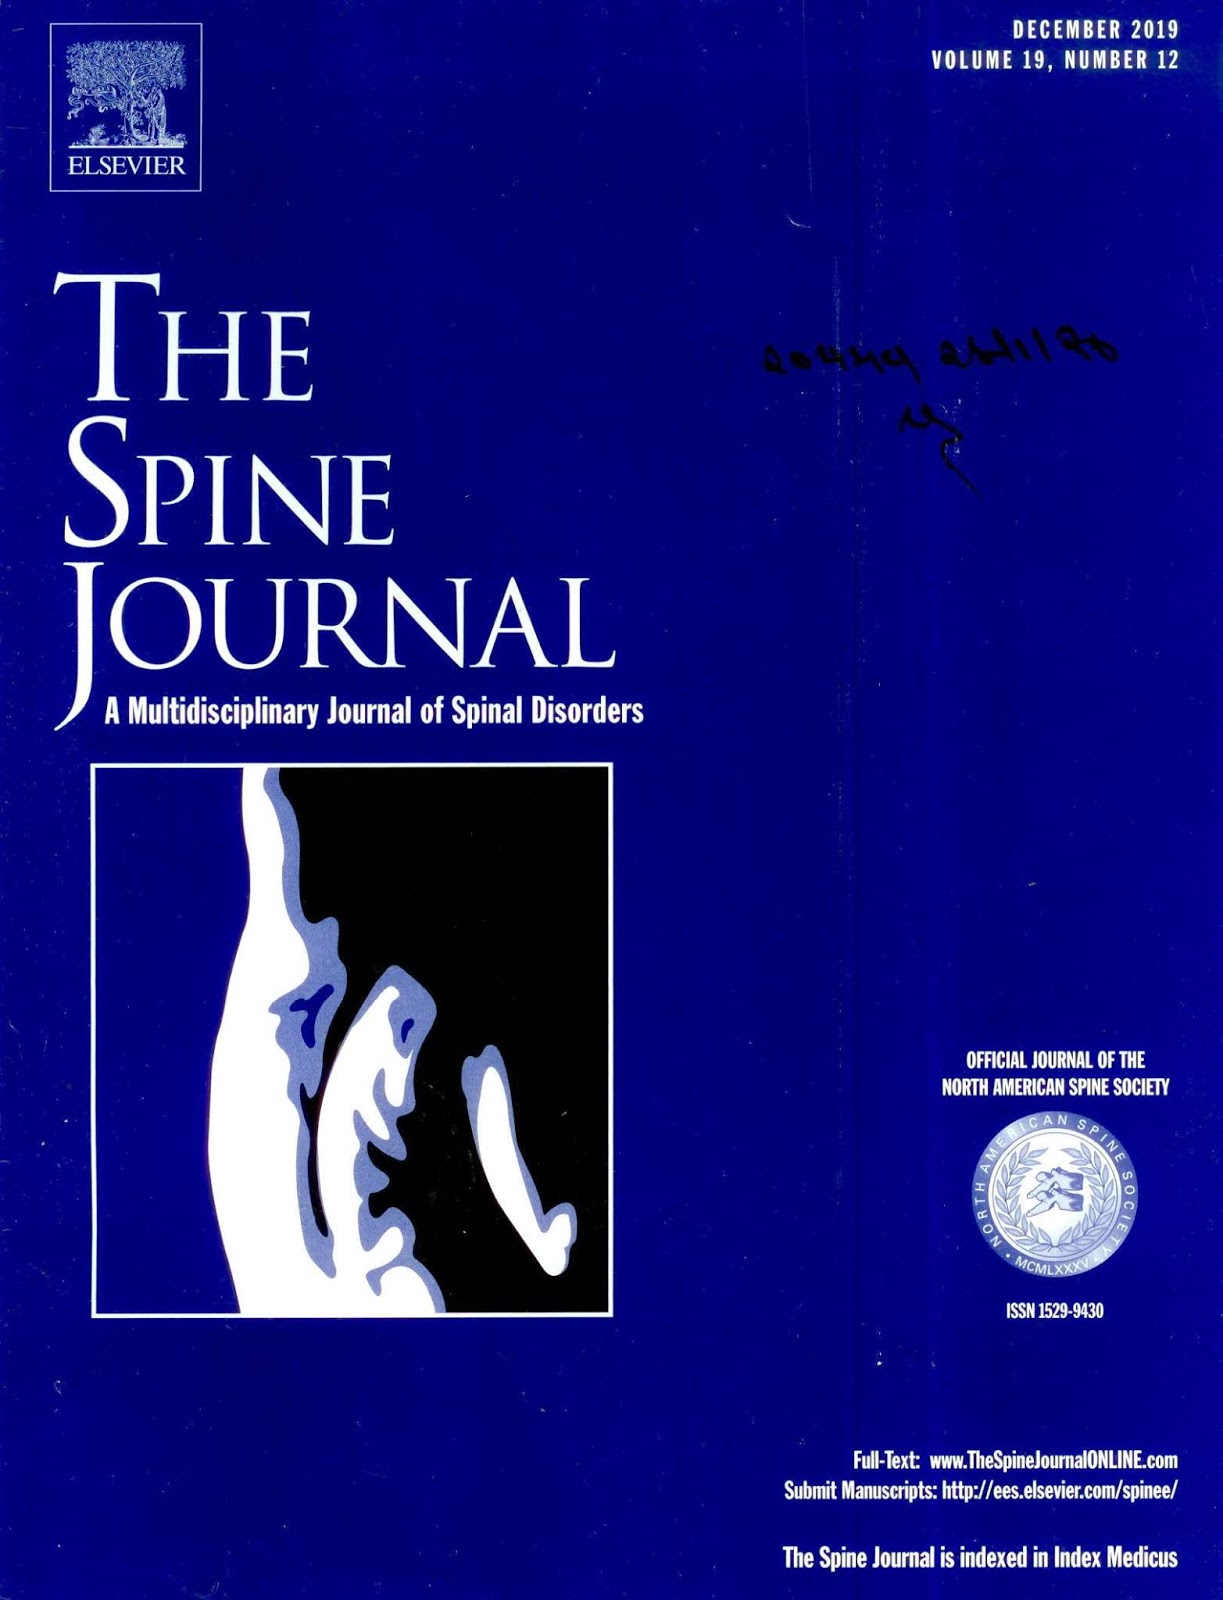 https://www.thespinejournalonline.com/issue/S1529-9430(19)X0012-1